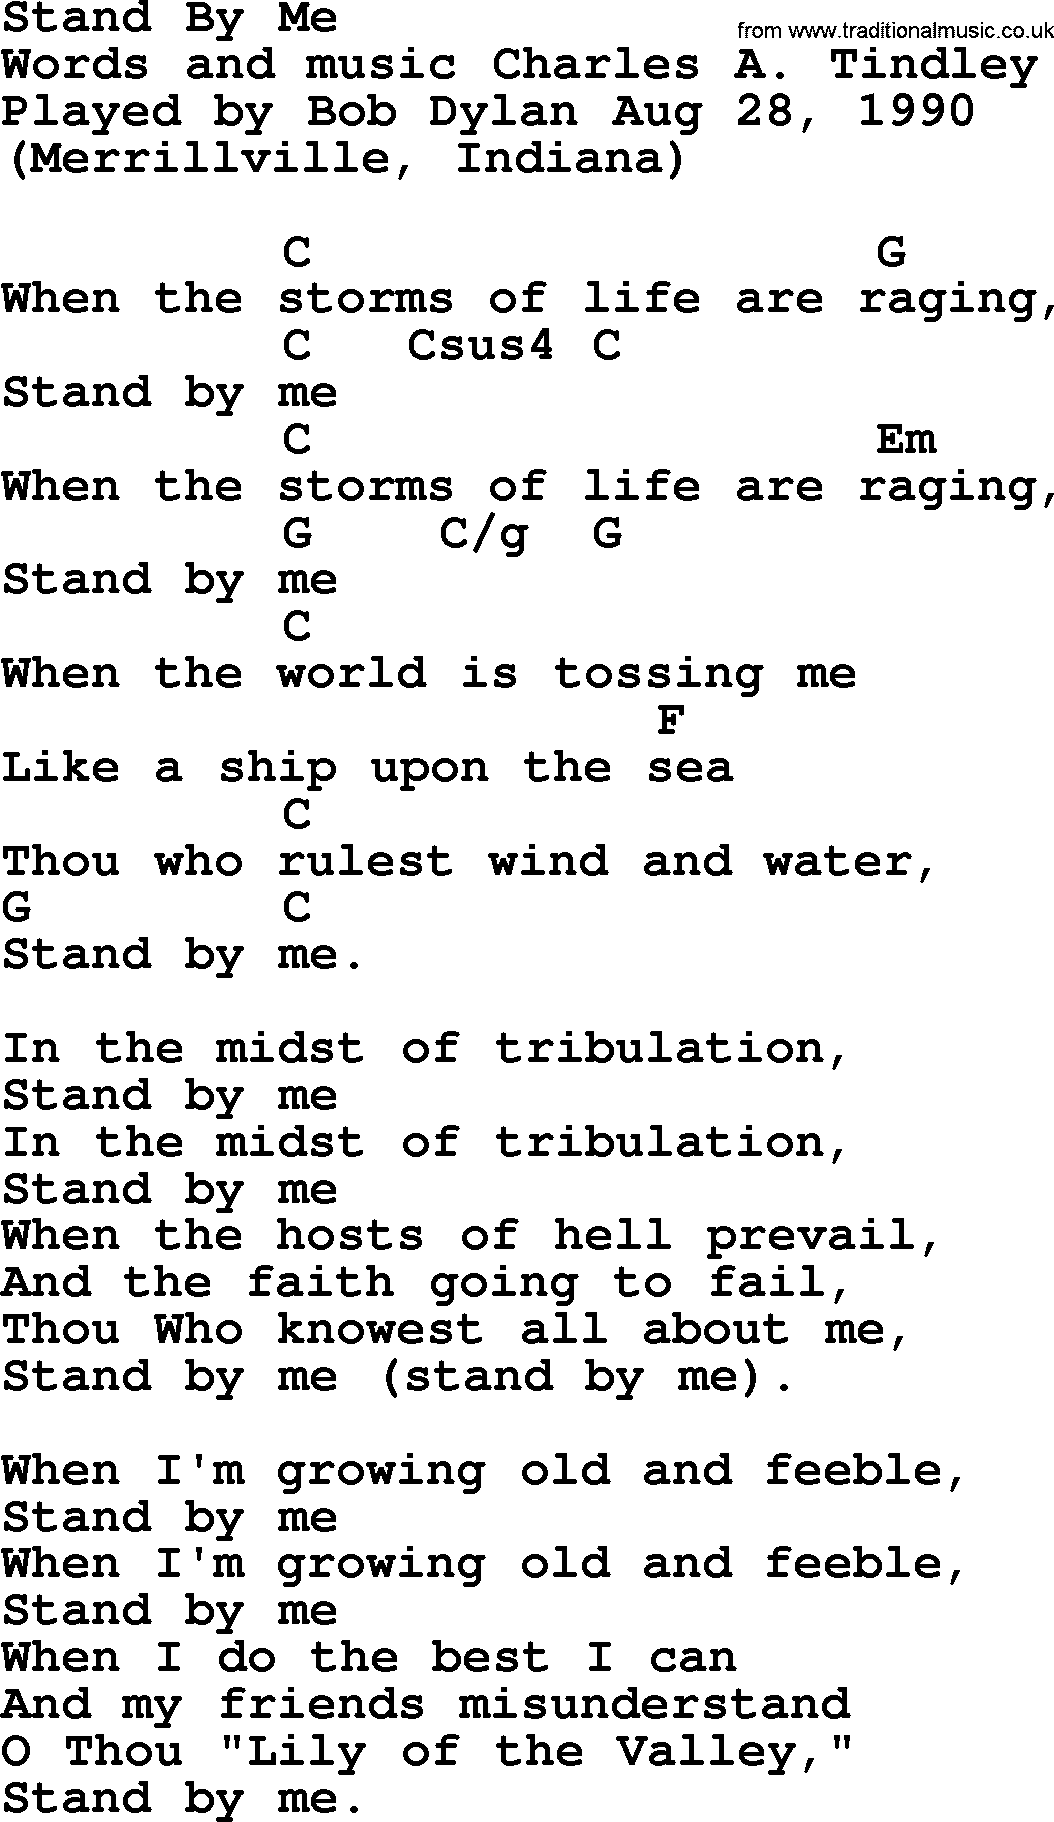 Bob Dylan song, lyrics with chords - Stand By Me